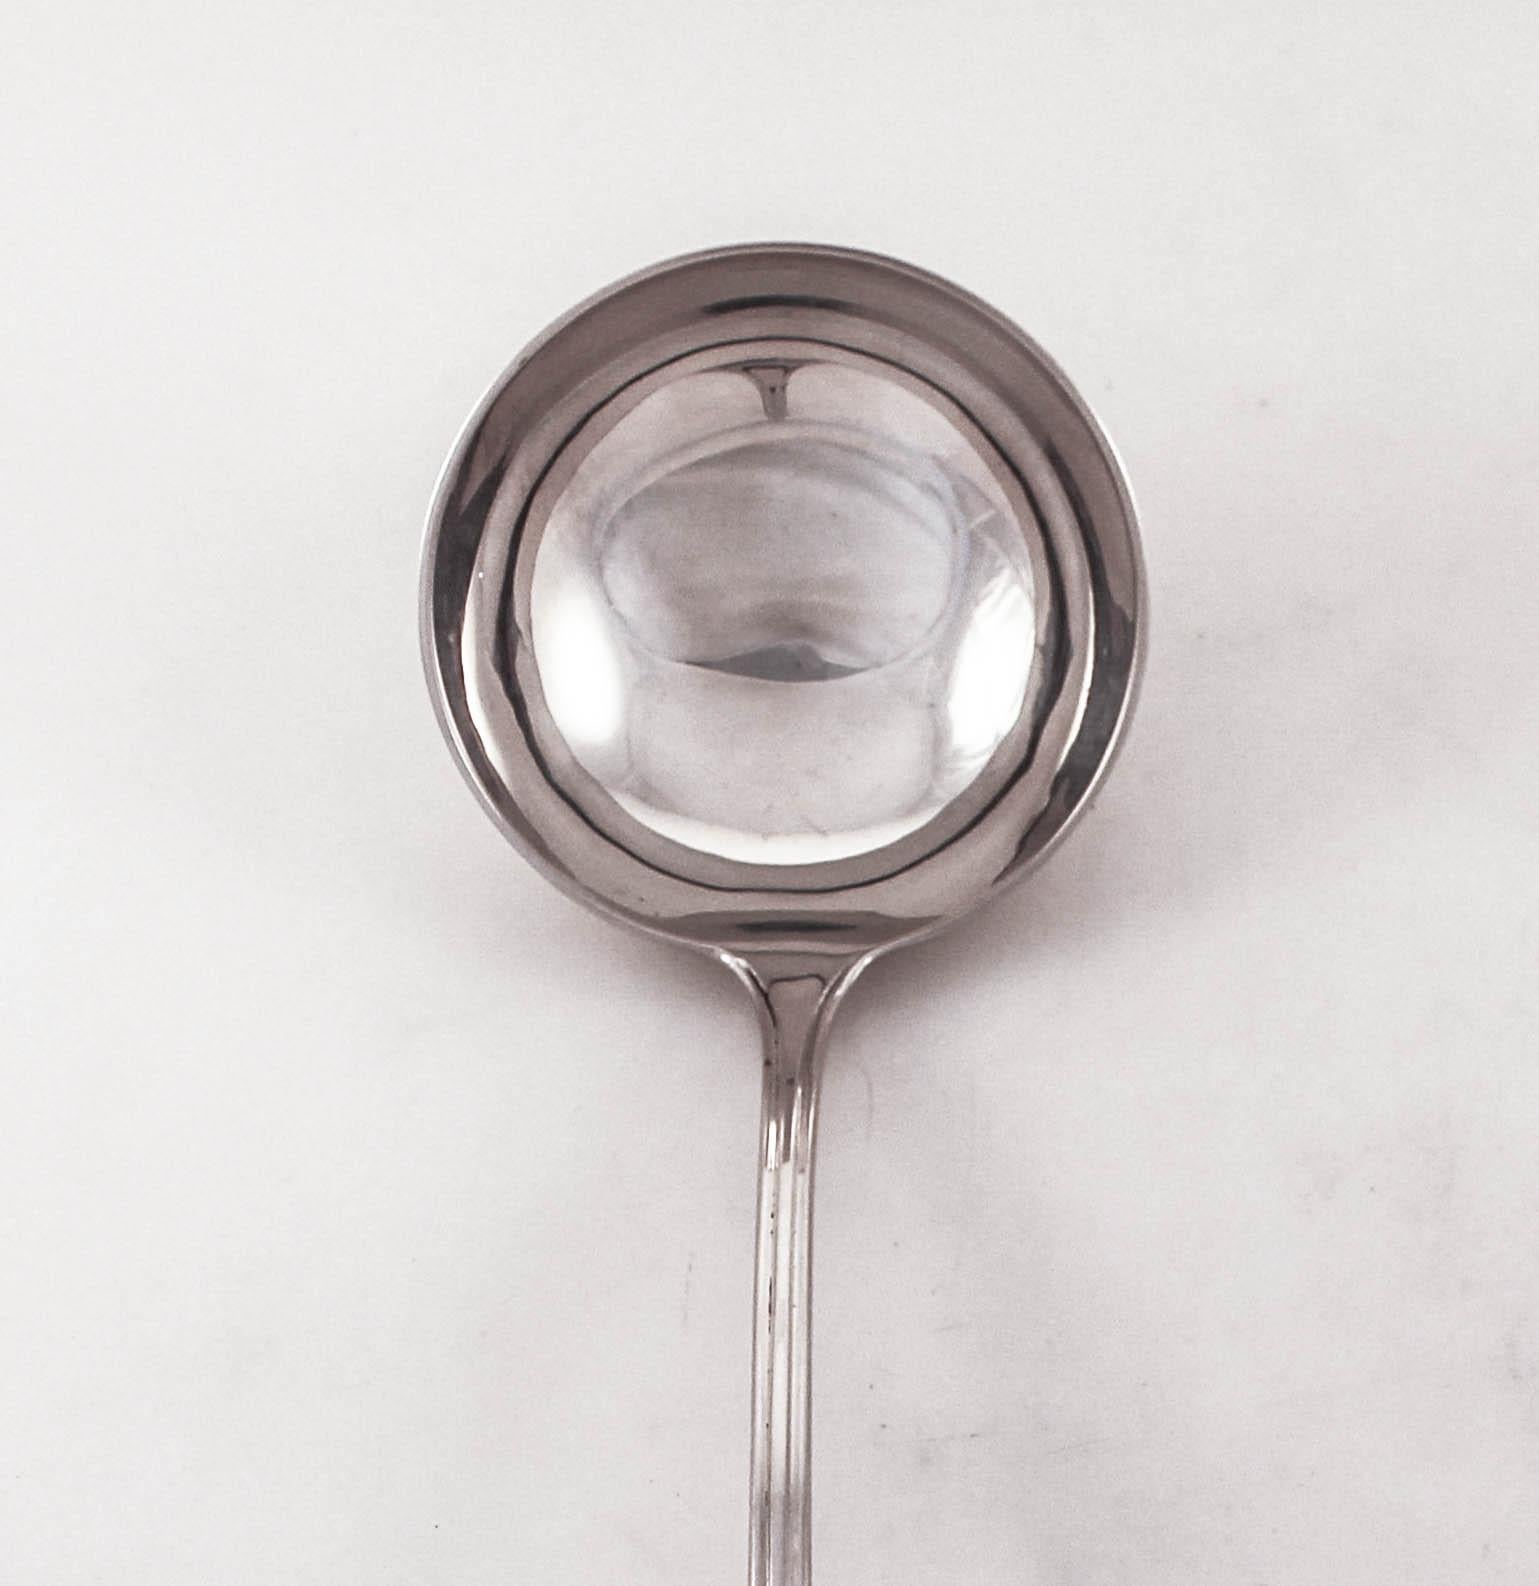 Being offered is a sterling silver (soup) ladle In the Bel Chateau pattern by Lunt Silversmiths. It is neither too ornate nor too plain; just a little design. It is sterling from top to bottom. The handle is double-enforced so that even when in a